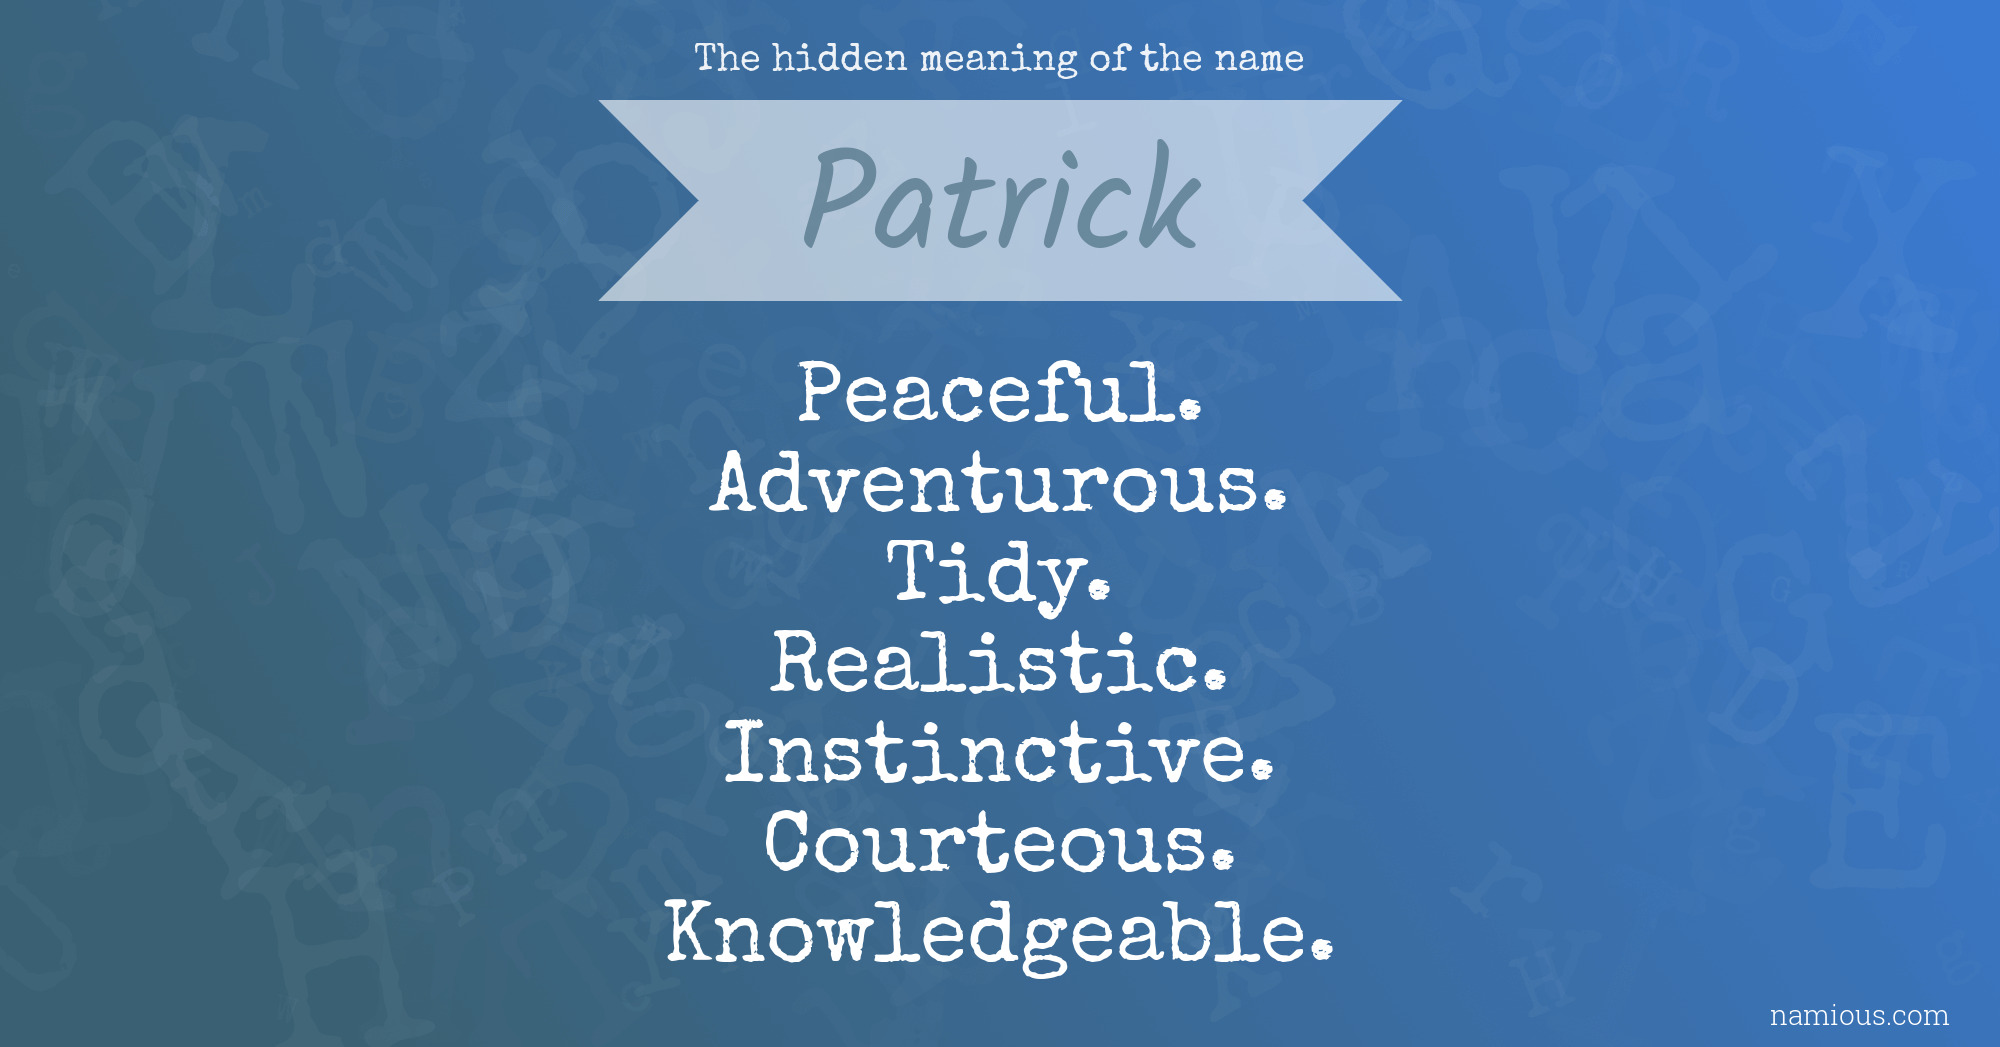 The hidden meaning of the name Patrick